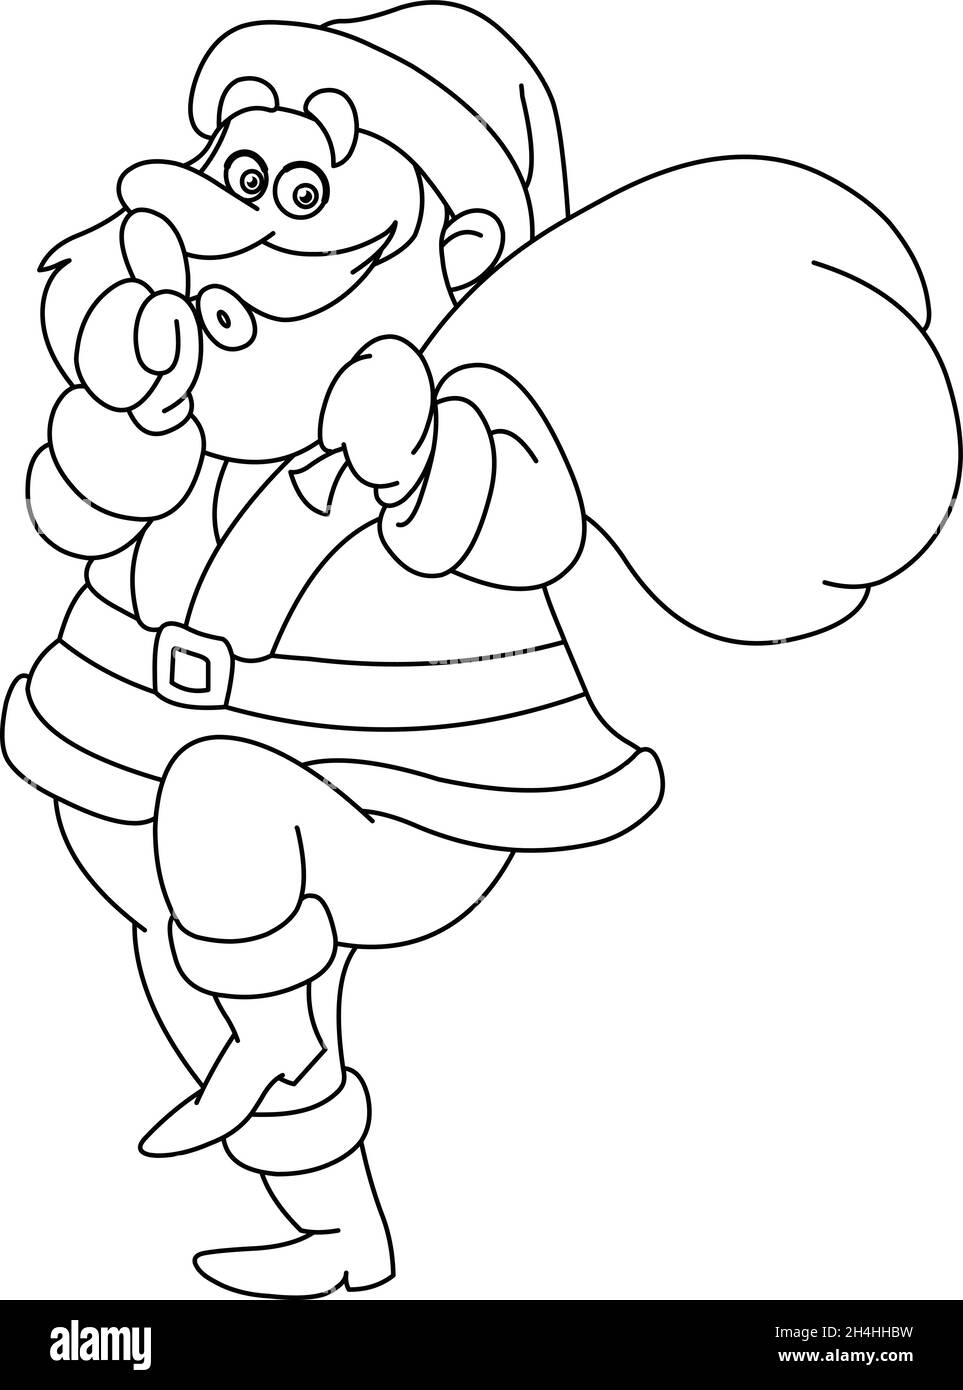 Outlined sneaky Santa Claus showing silence sign and tip toeing carrying gifts sack. Vector line art illustration coloring page. Stock Vector